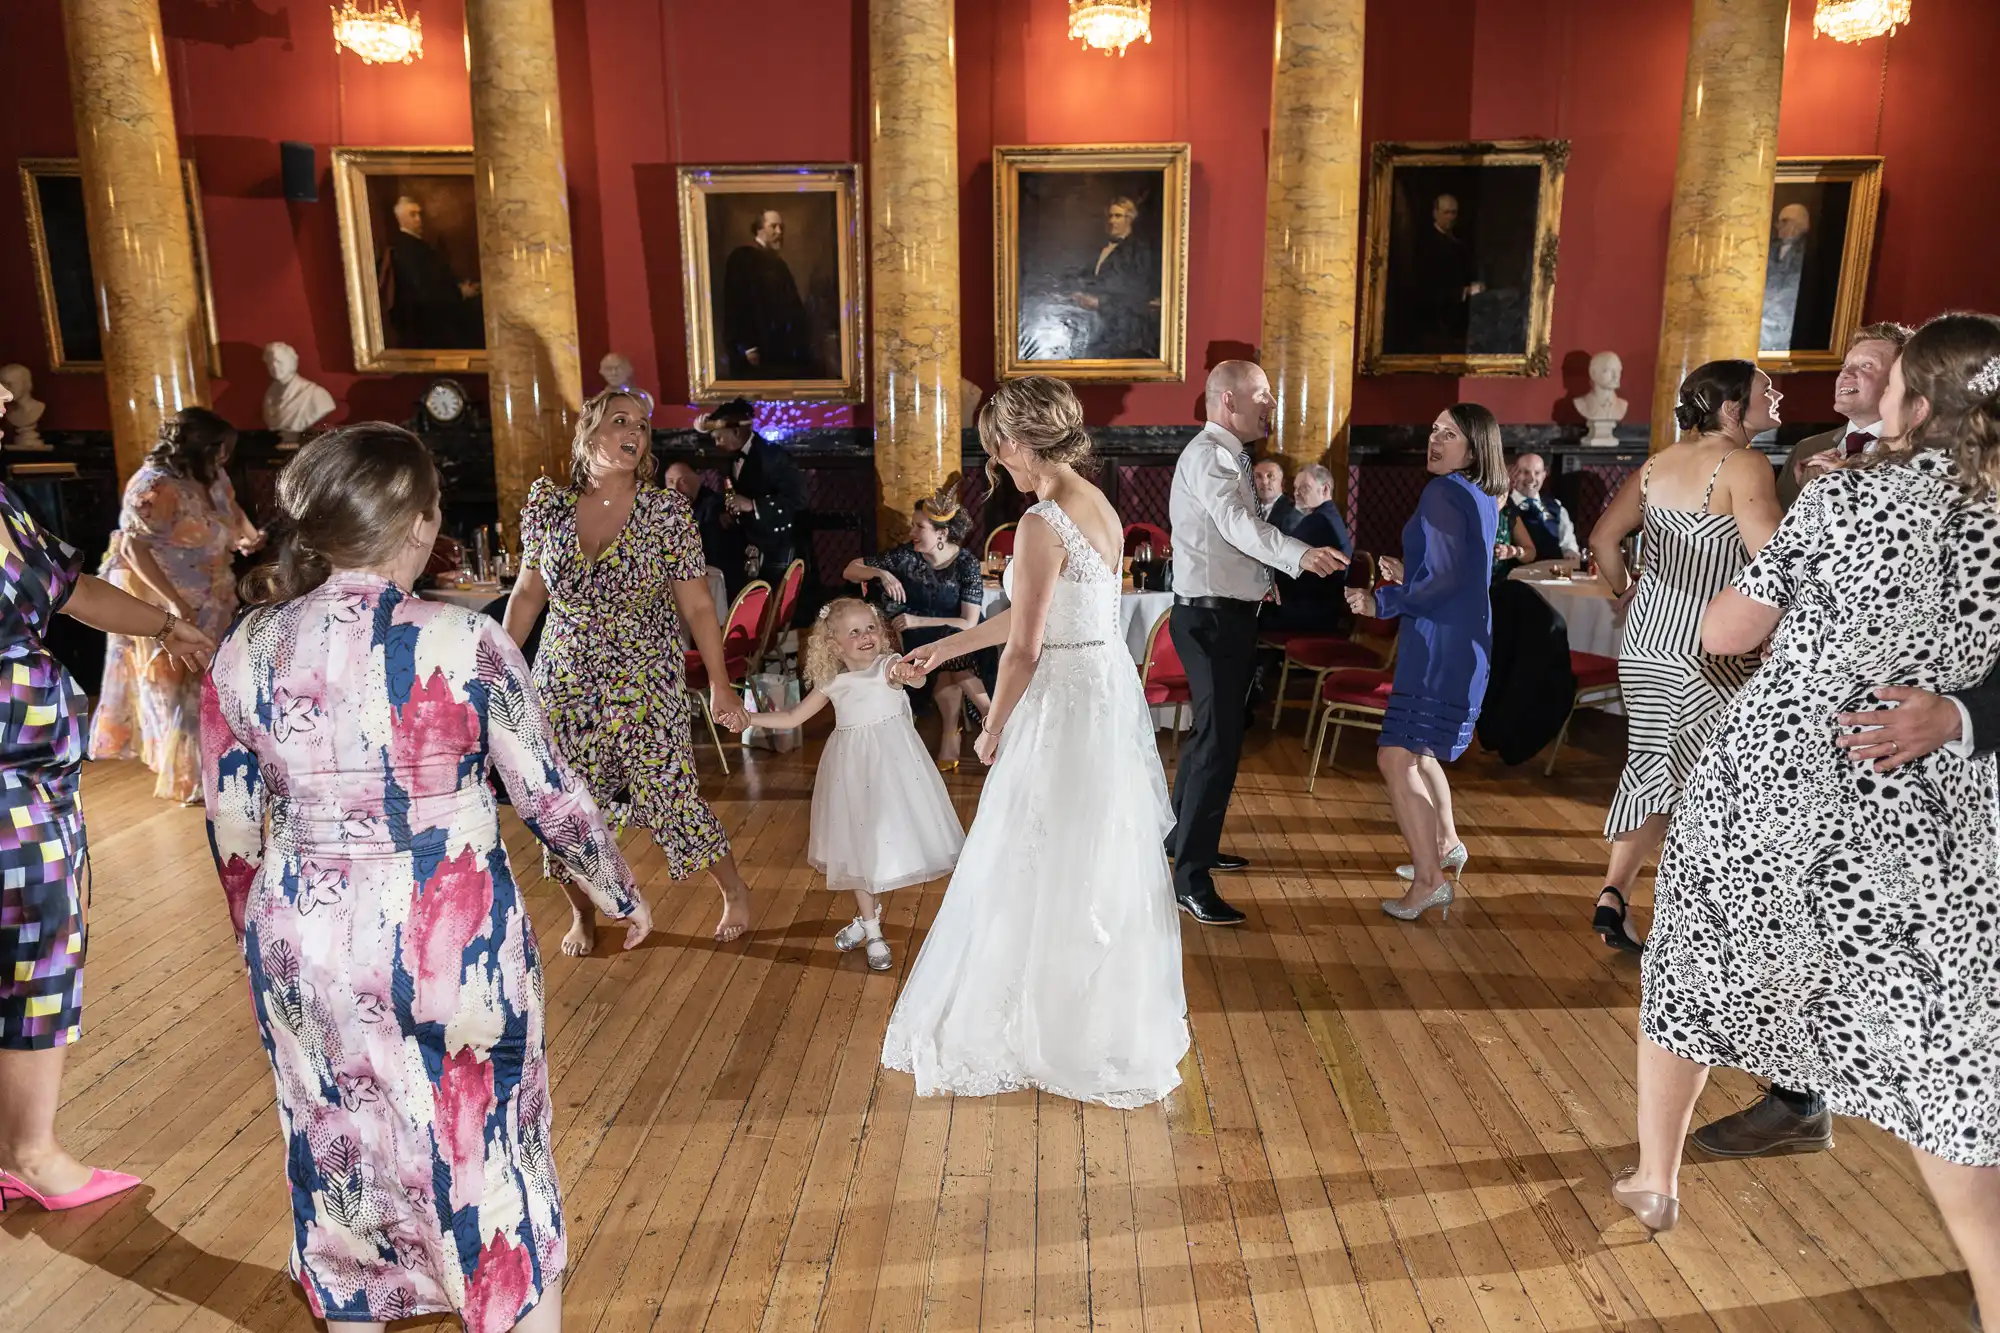 Guests, including a bride in a white dress, are dancing in a large hall with wooden floors and portraits on the walls. There is a little girl in a white dress holding hands with the bride.